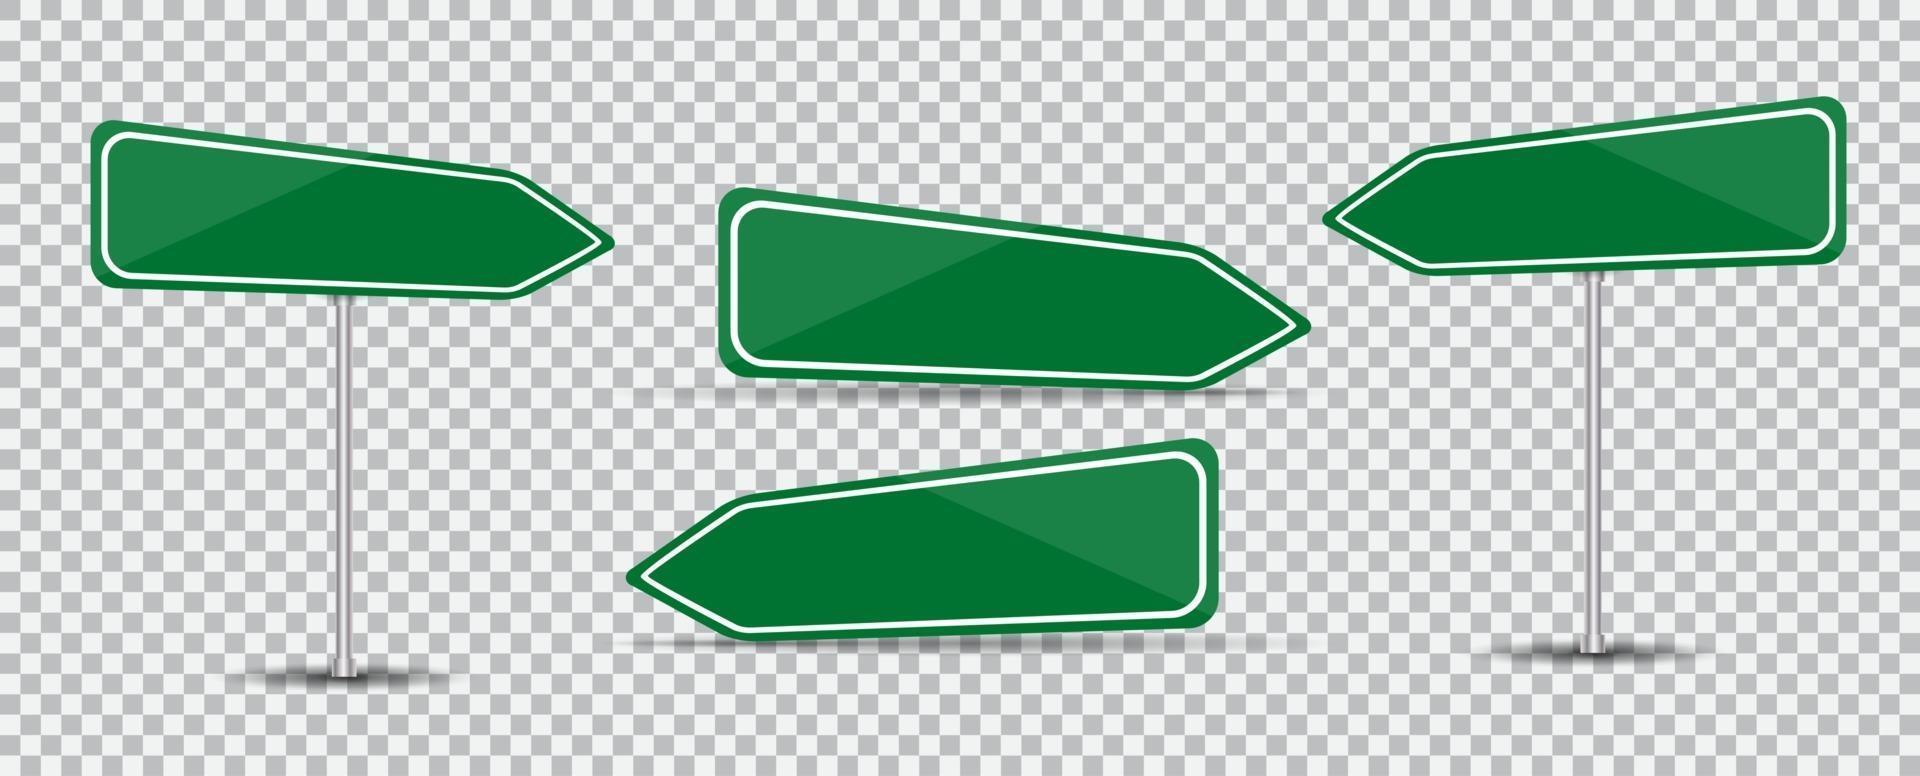 Road Sign Isolated. Blank green arrow traffic vector